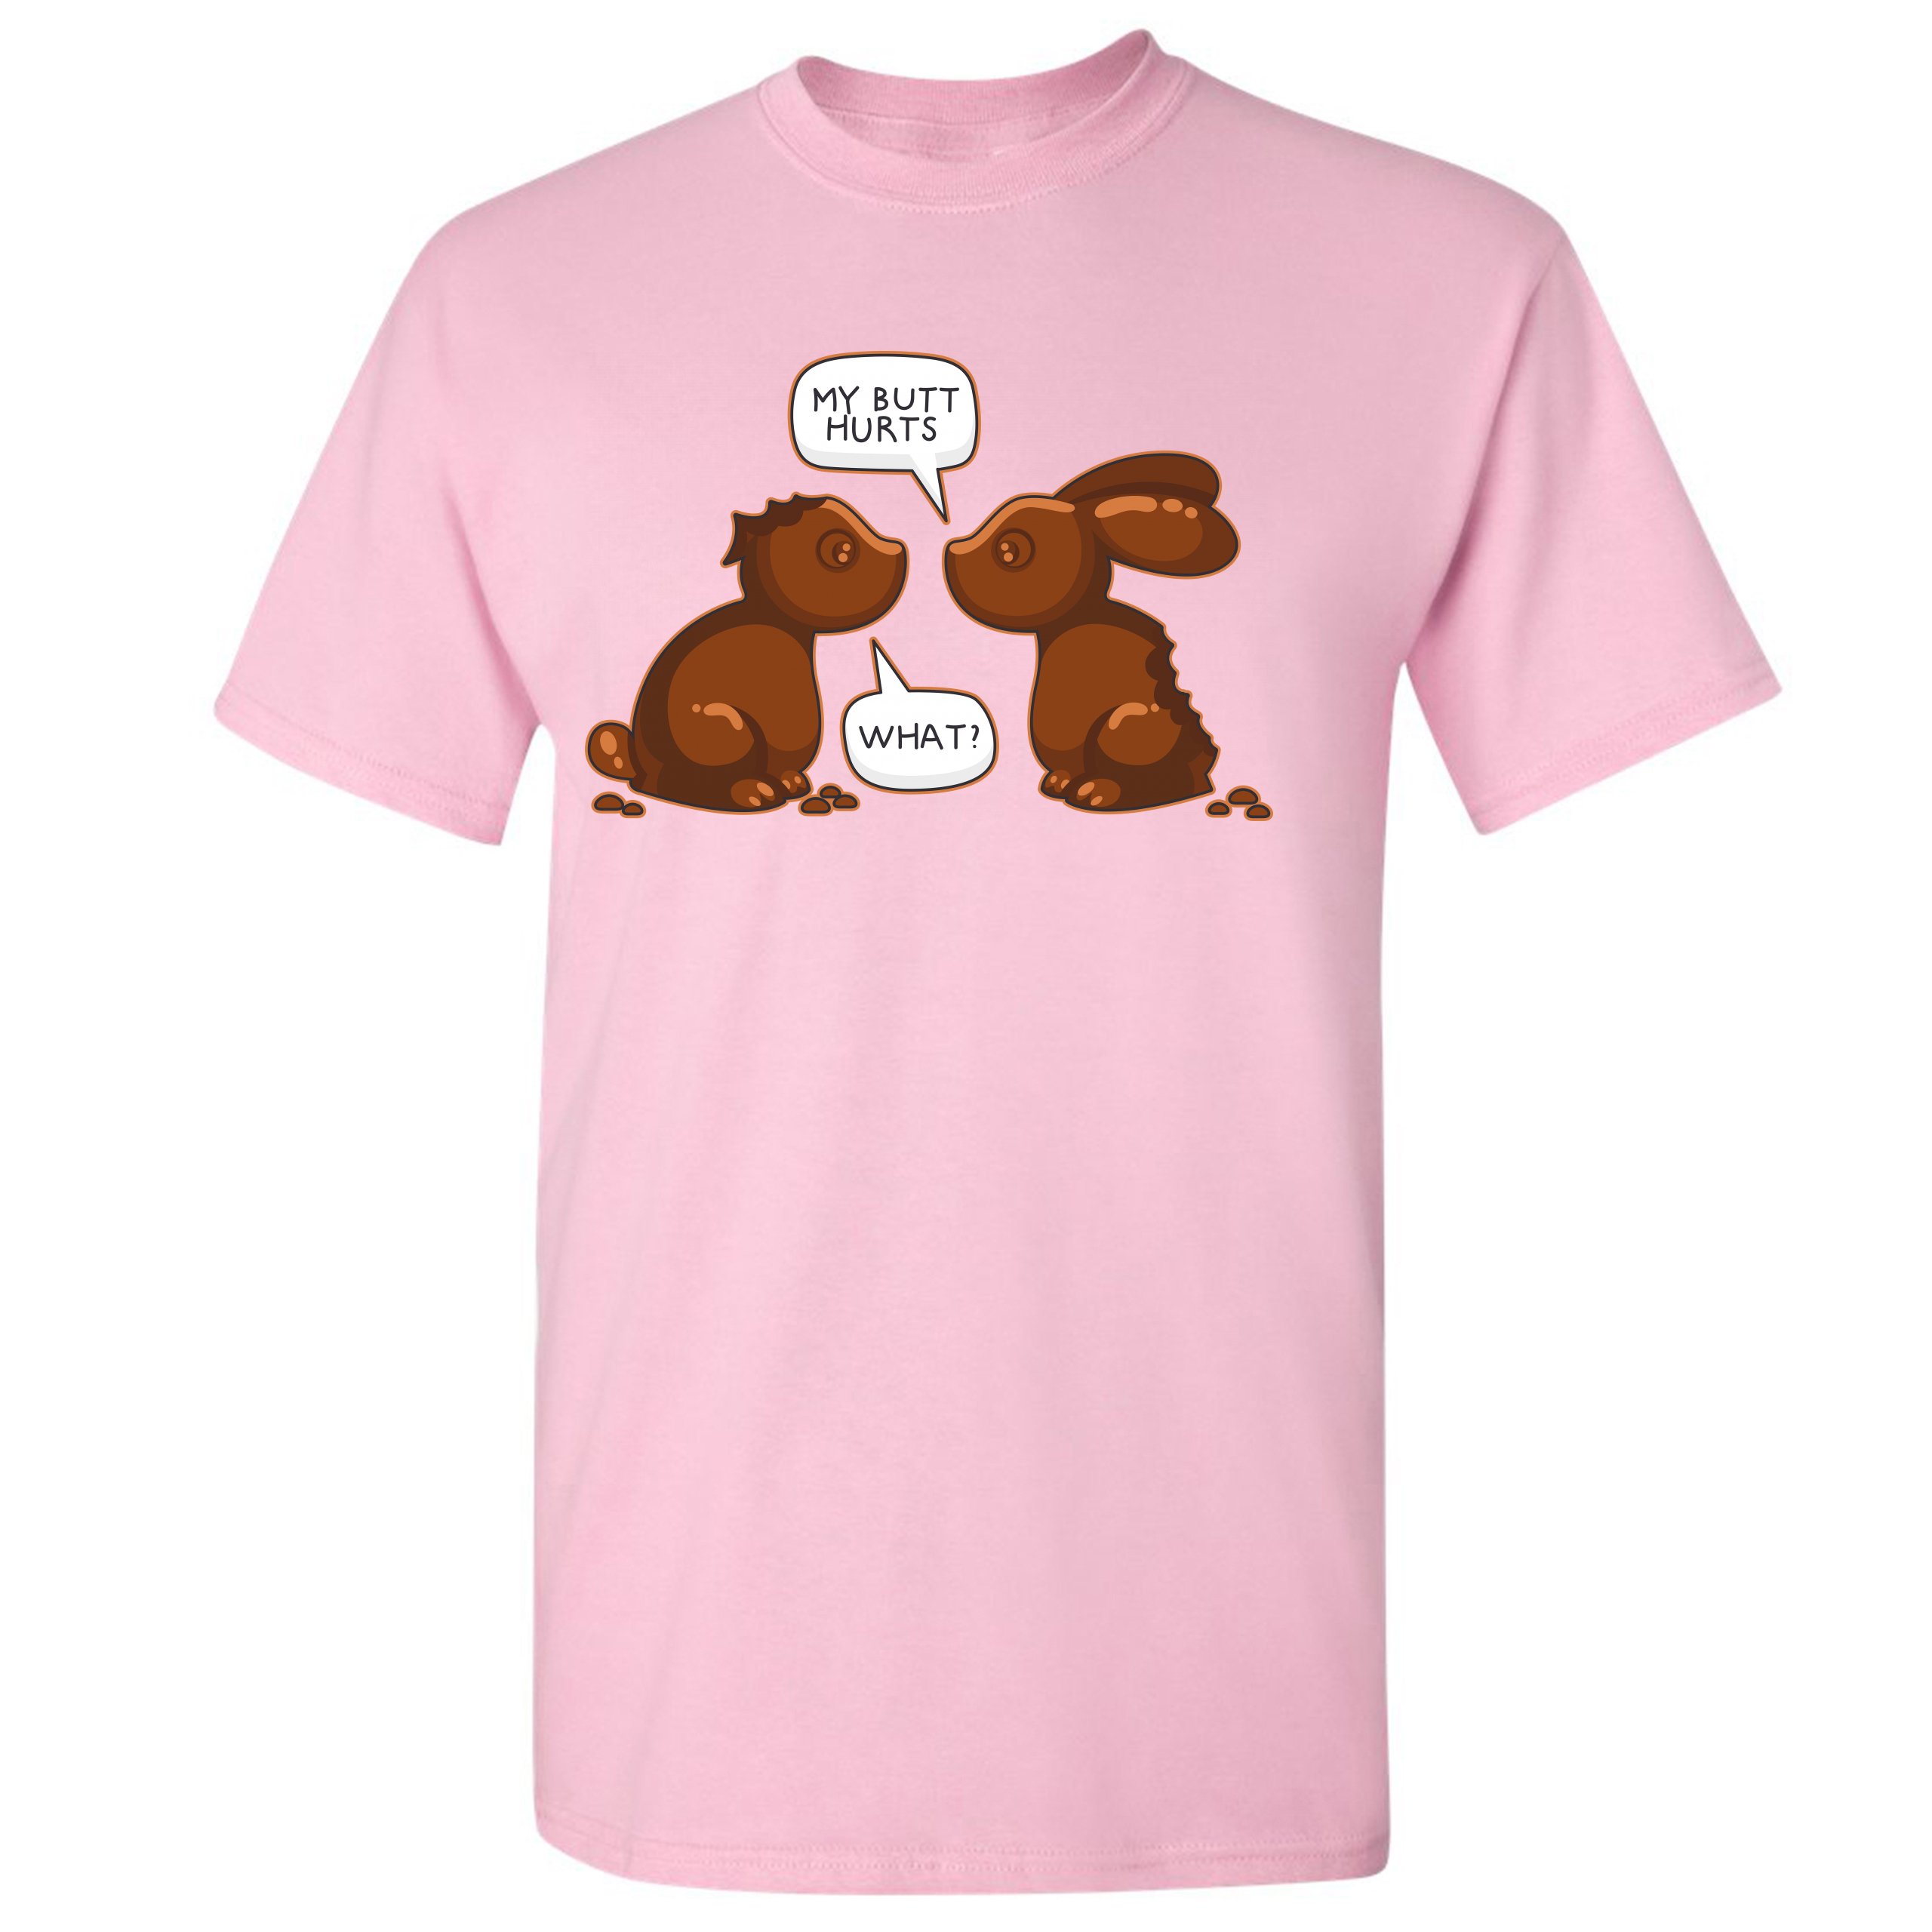 My Butt Hurts - What? T-shirt Chocolate Bunnies Easter Rabbits Men's ...